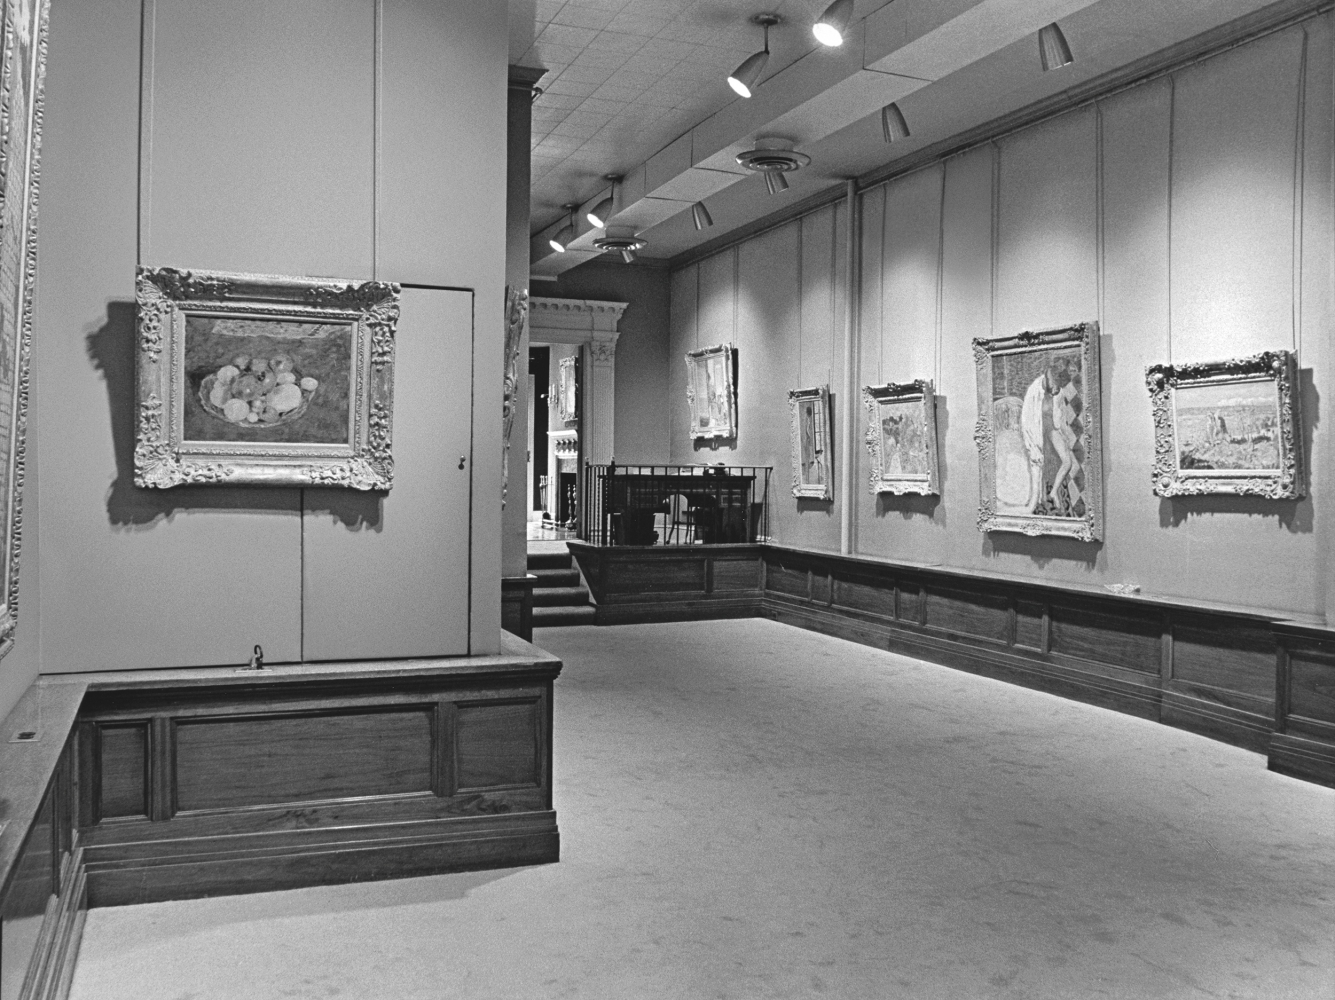 Installation view of Pierre Bonnard, on view at Acquavella Galleries from November 9 - December 11, 1965.